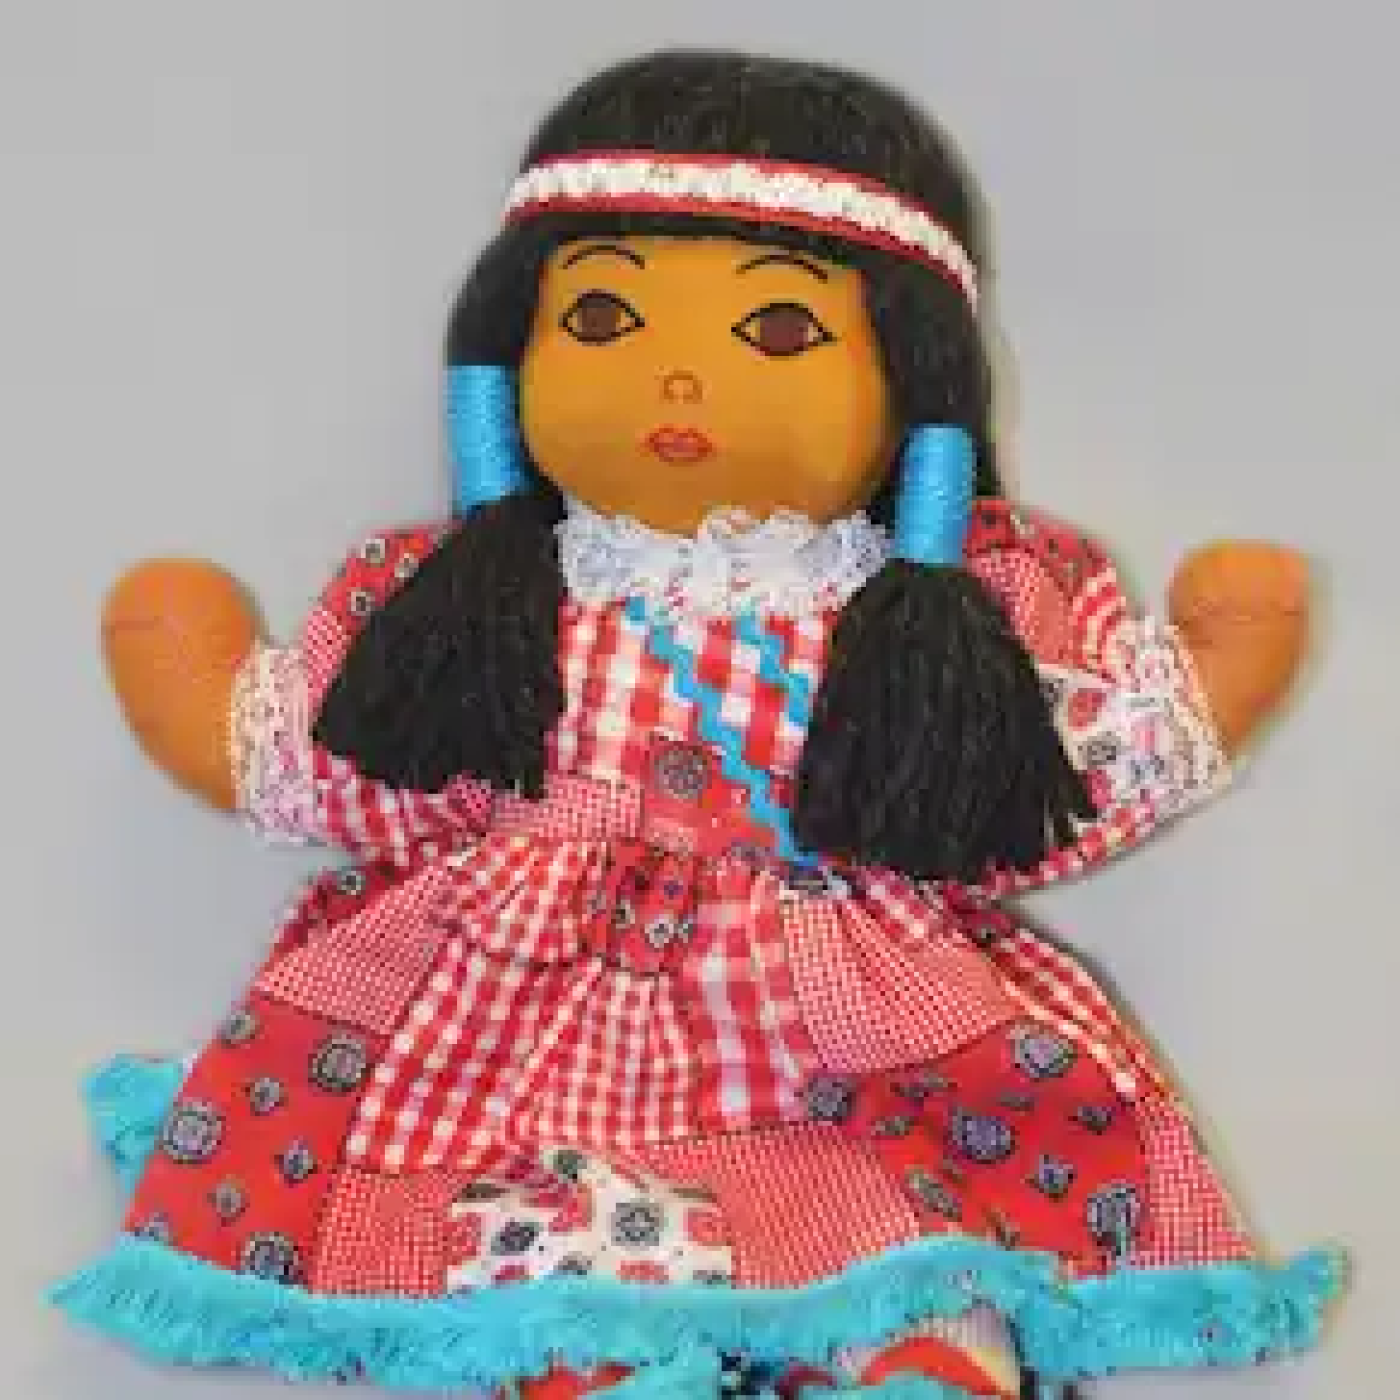 "Miss Gladys" Suzy Belle Girl Doll (c. 1974) by Hualapai Tribal Doll Factory. From the BIA Museum collection.